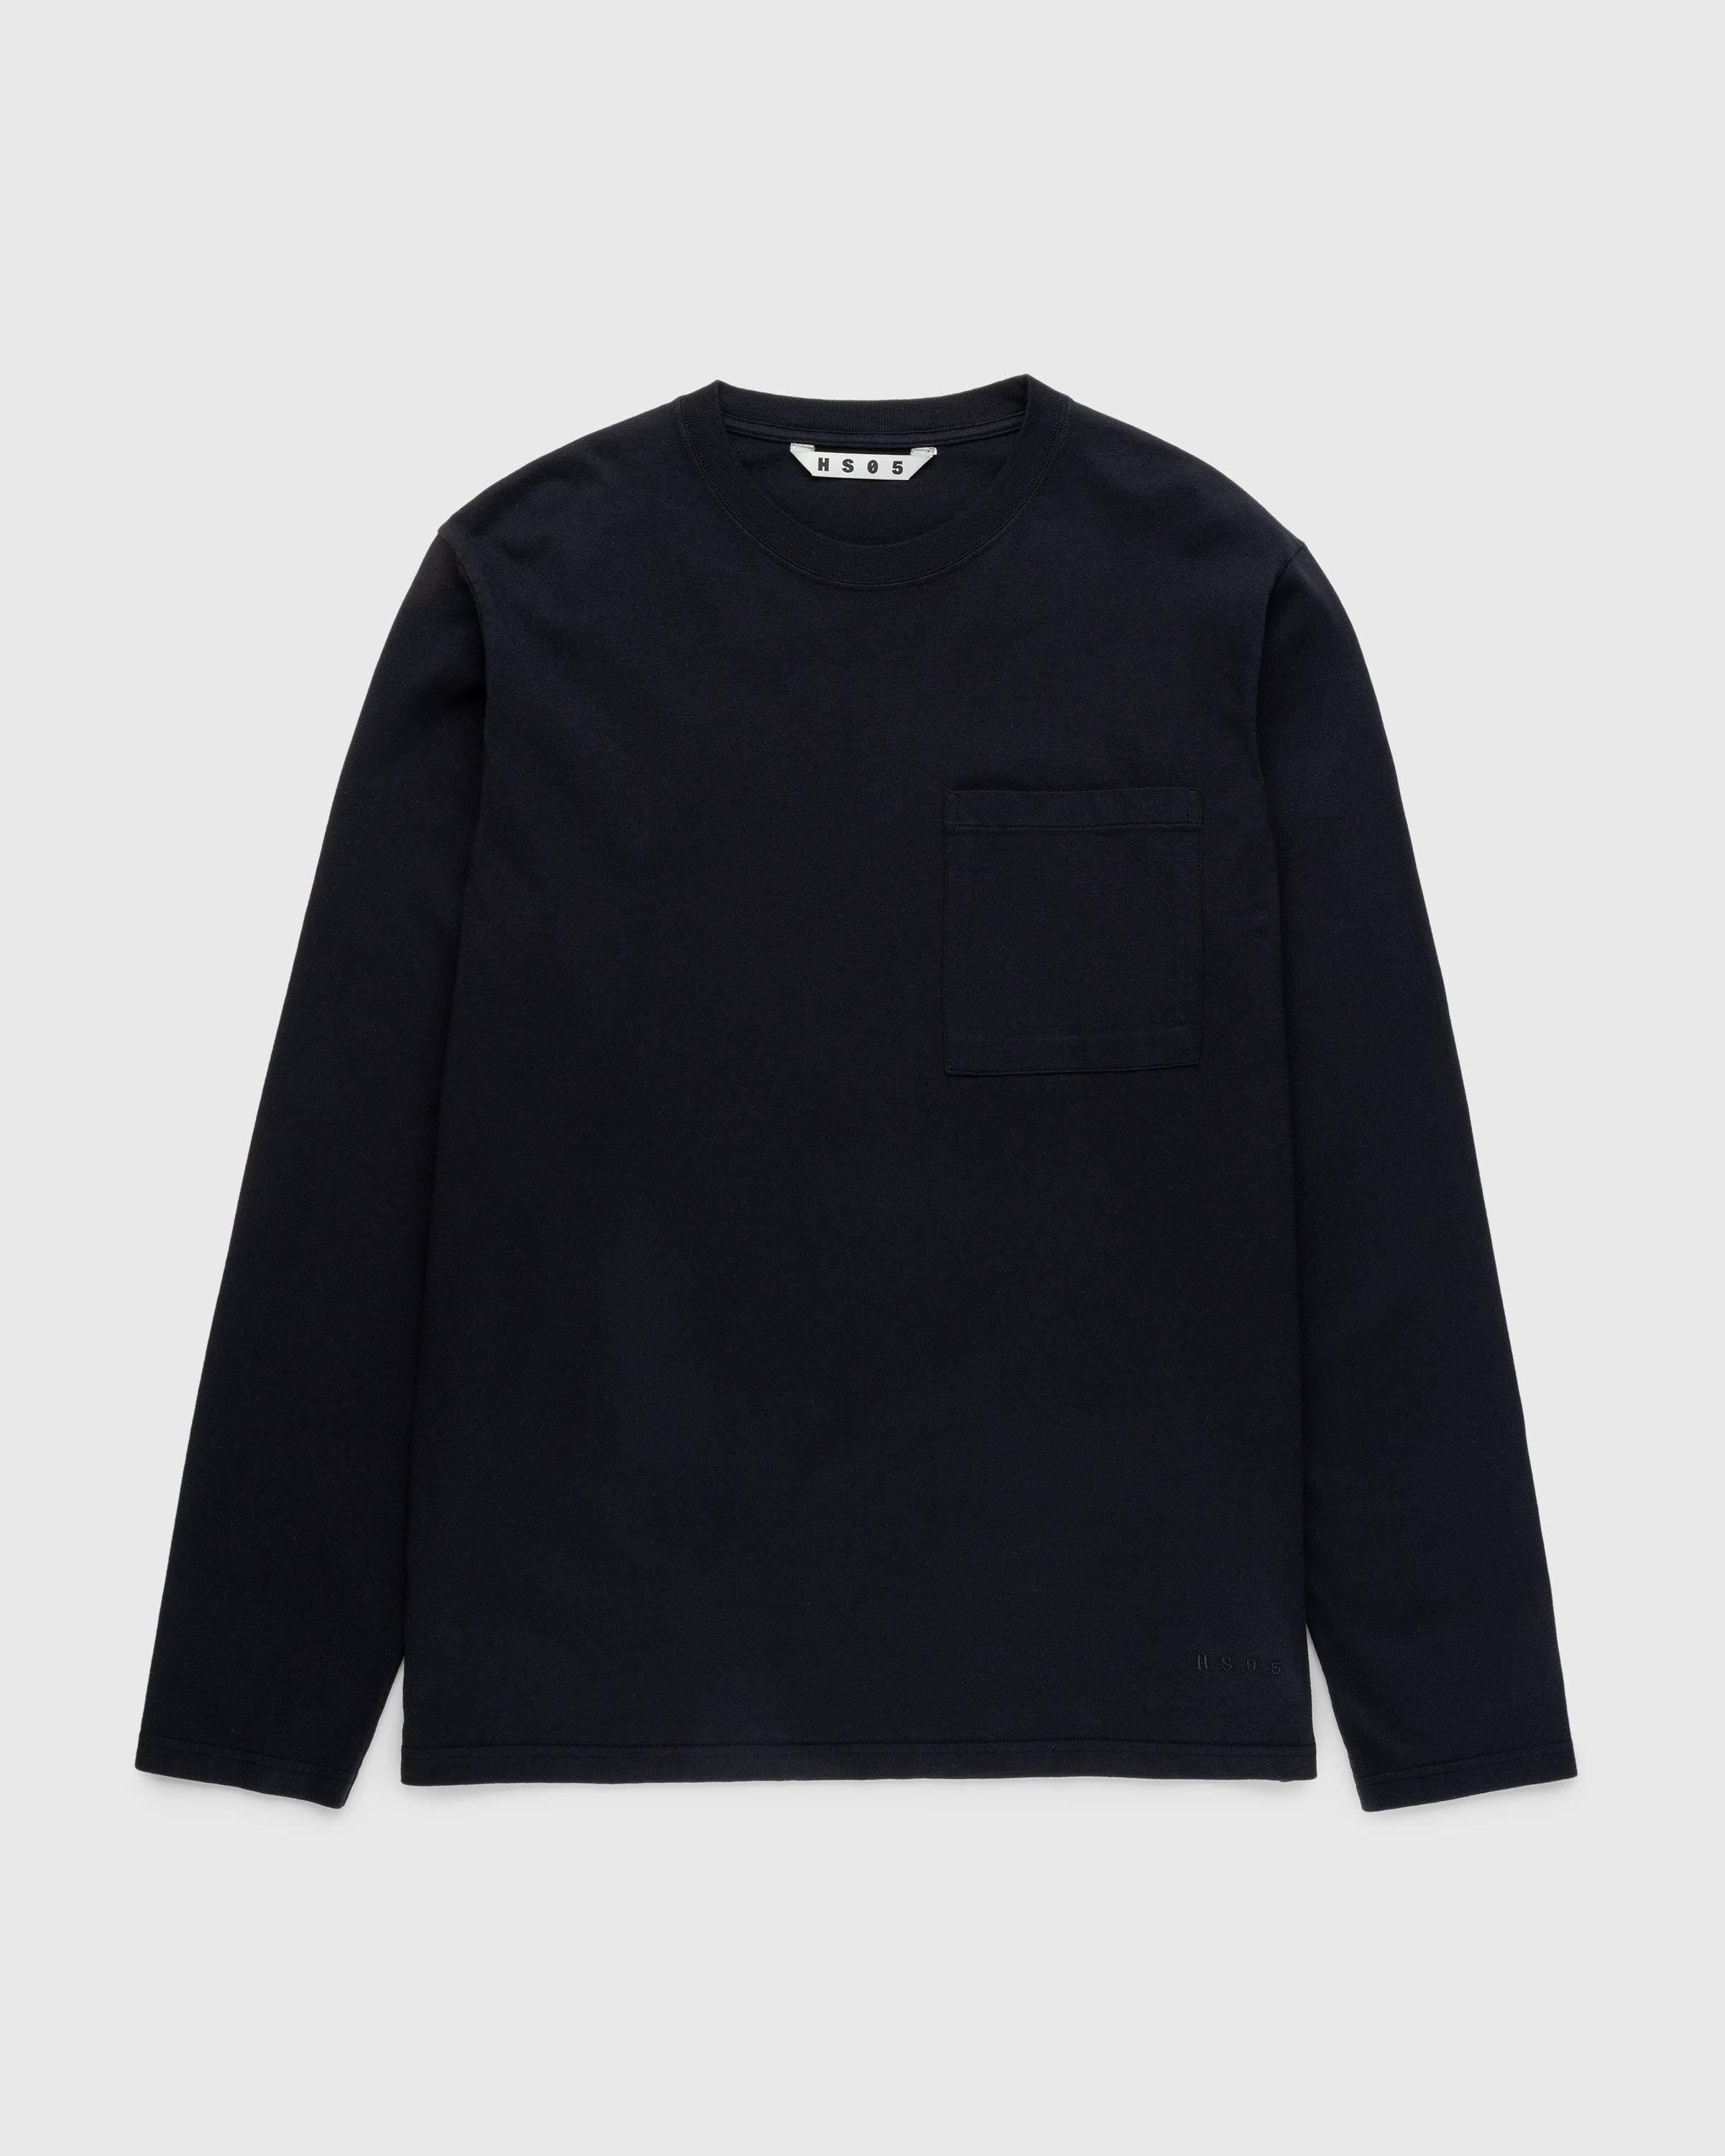 Highsnobiety HS05 – Pigment Dyed Boxy Long Sleeves Jersey Black ...